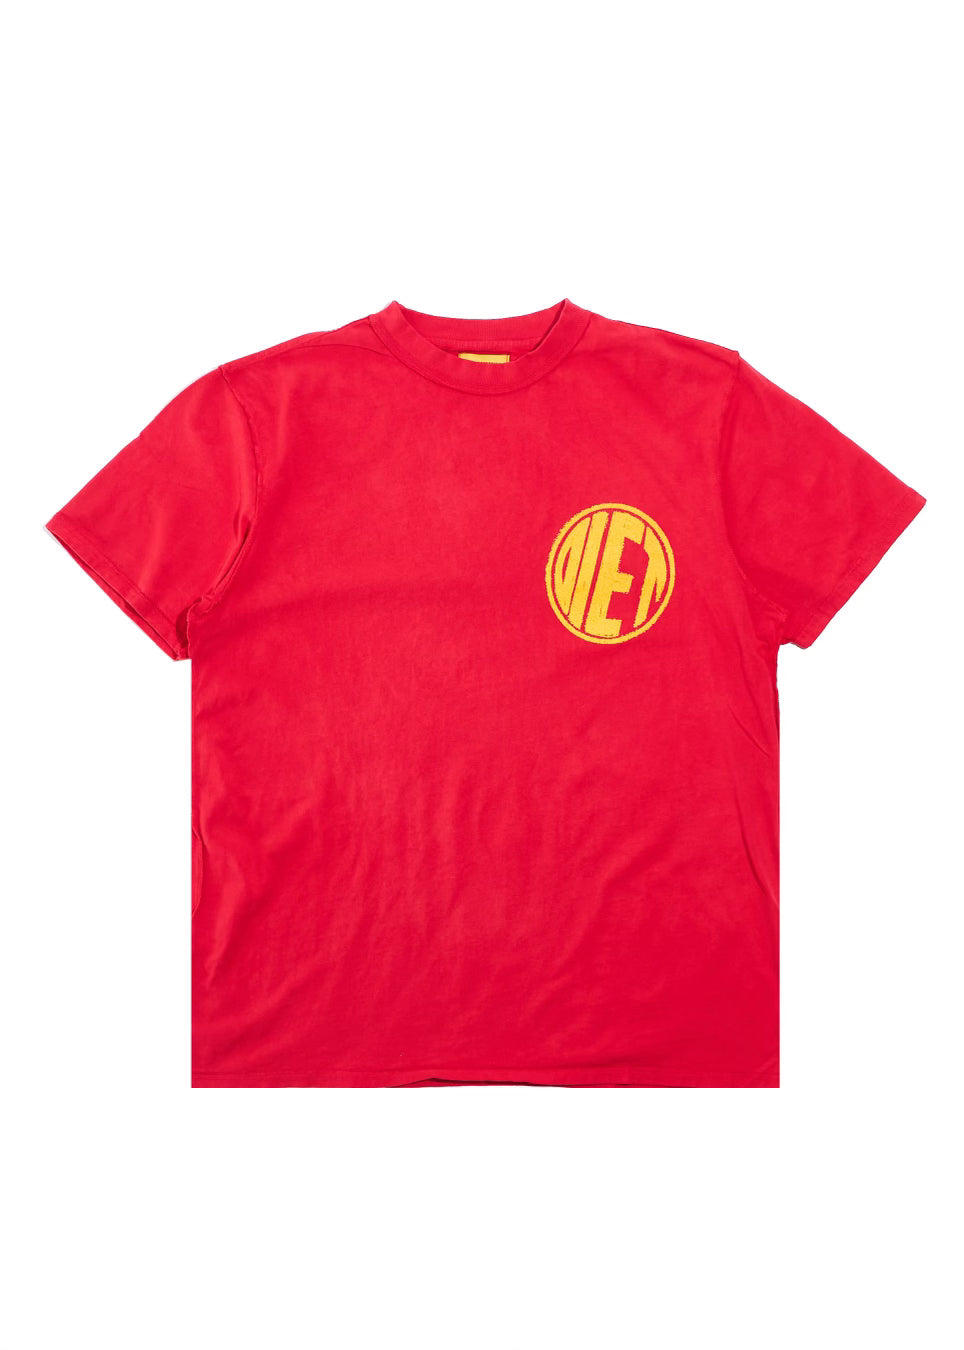 Stamp Tee - Red